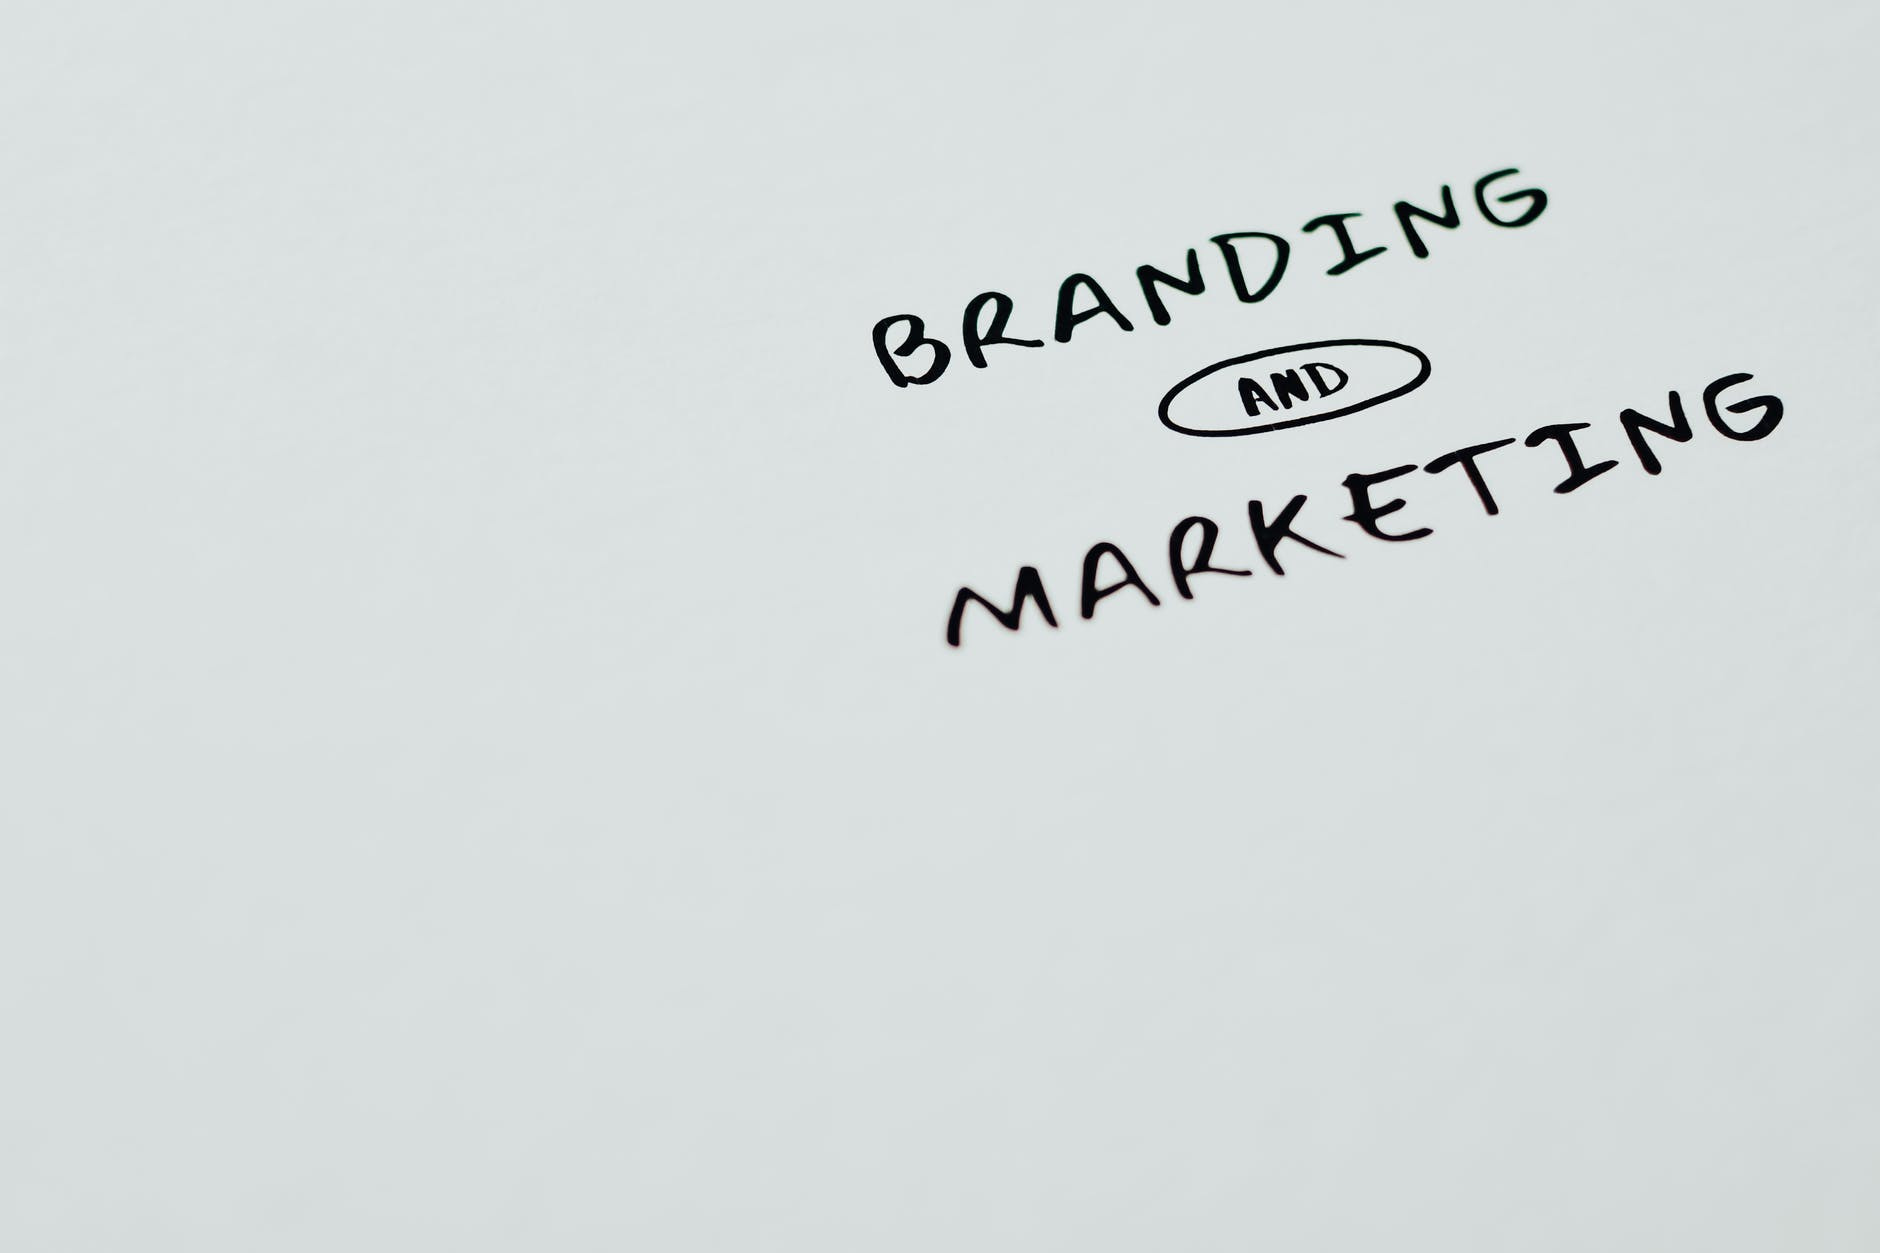 branding and marketing text on a white surface